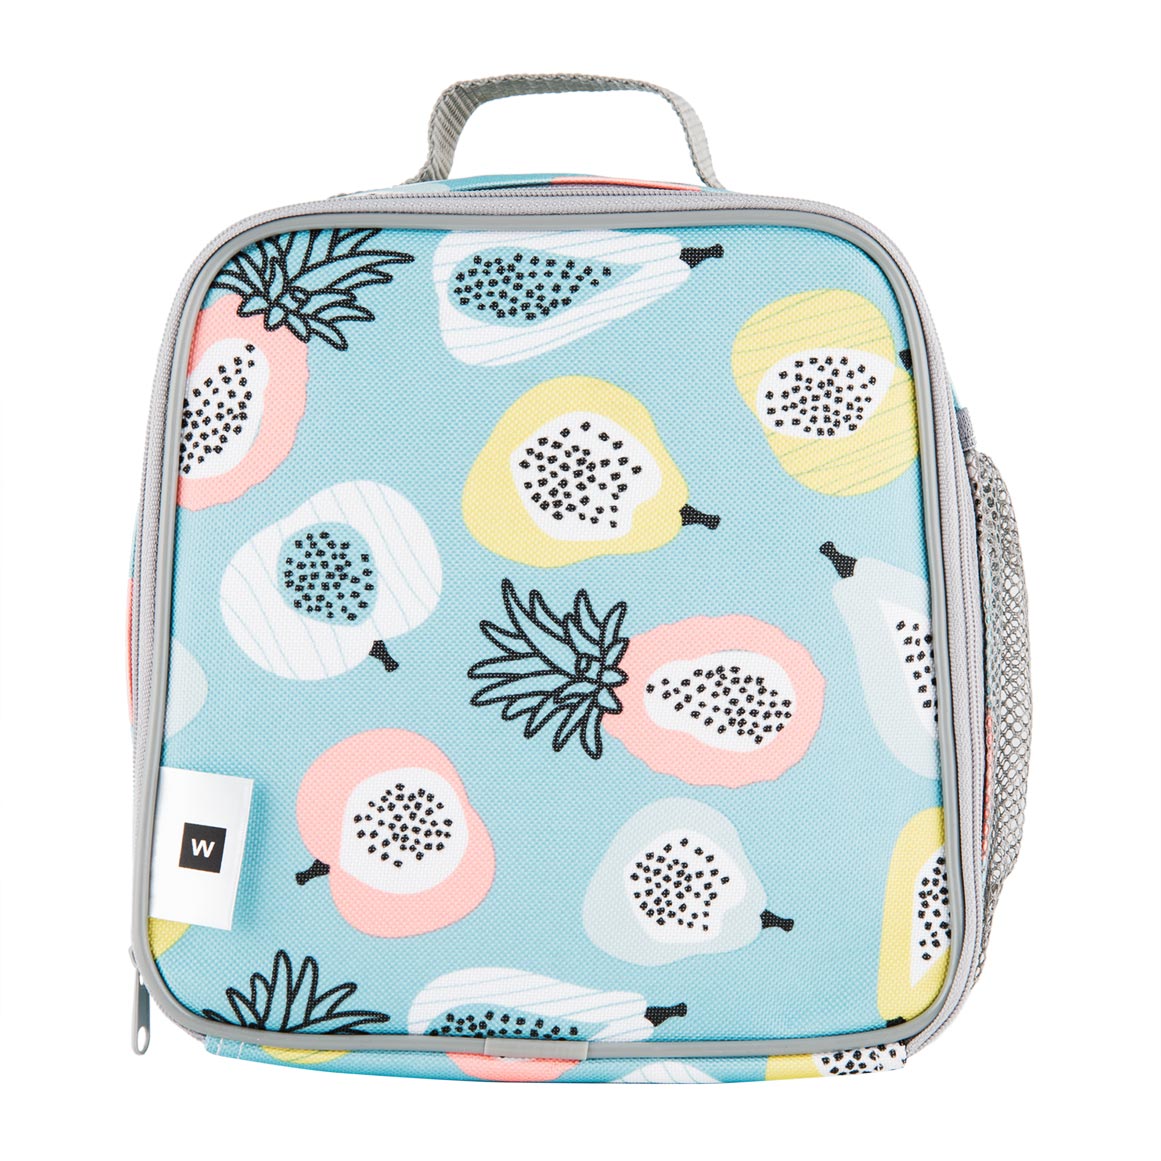 Lunch Cooler Bag | Woolworths.co.za